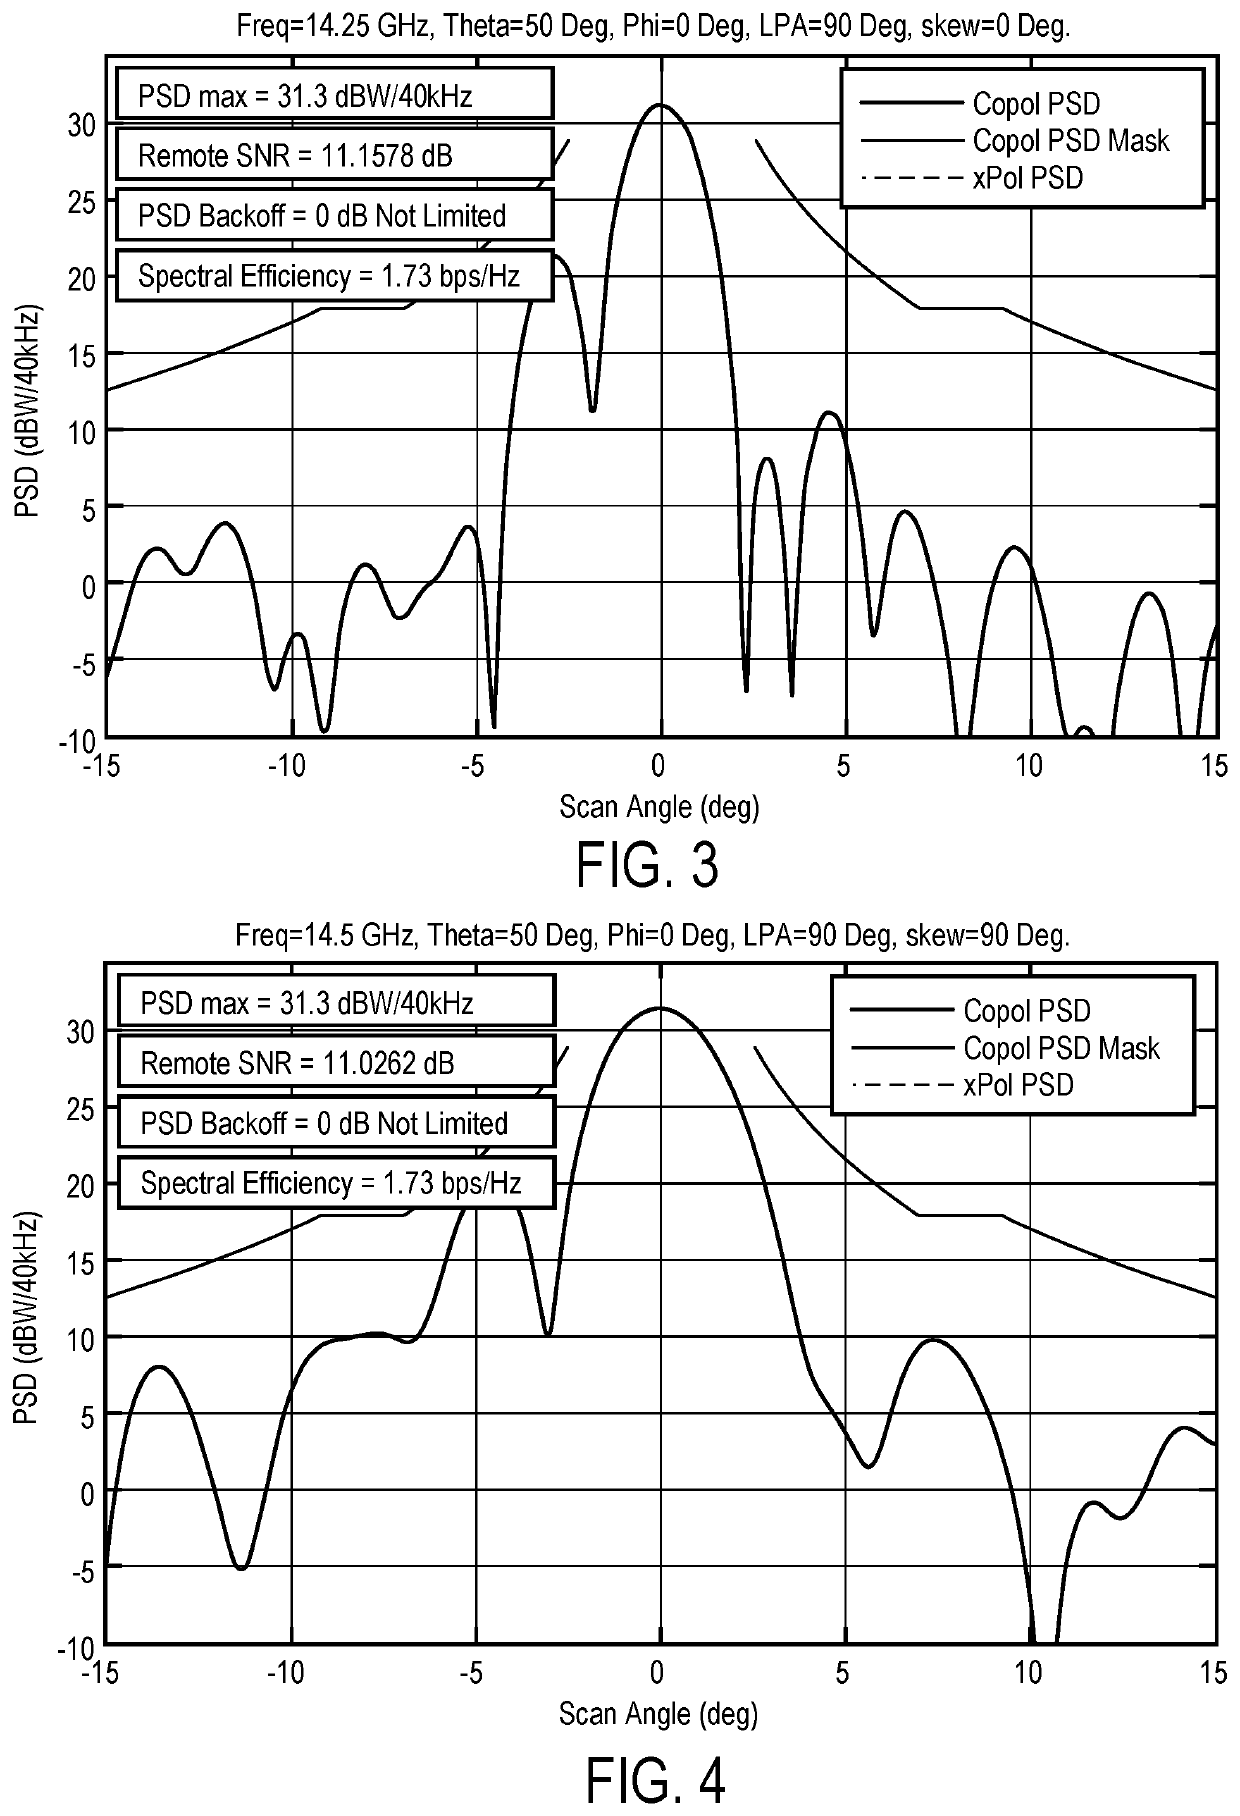 Uplink Power Control Using Power Spectral Density to Avoid Adjacent Satellite Interference